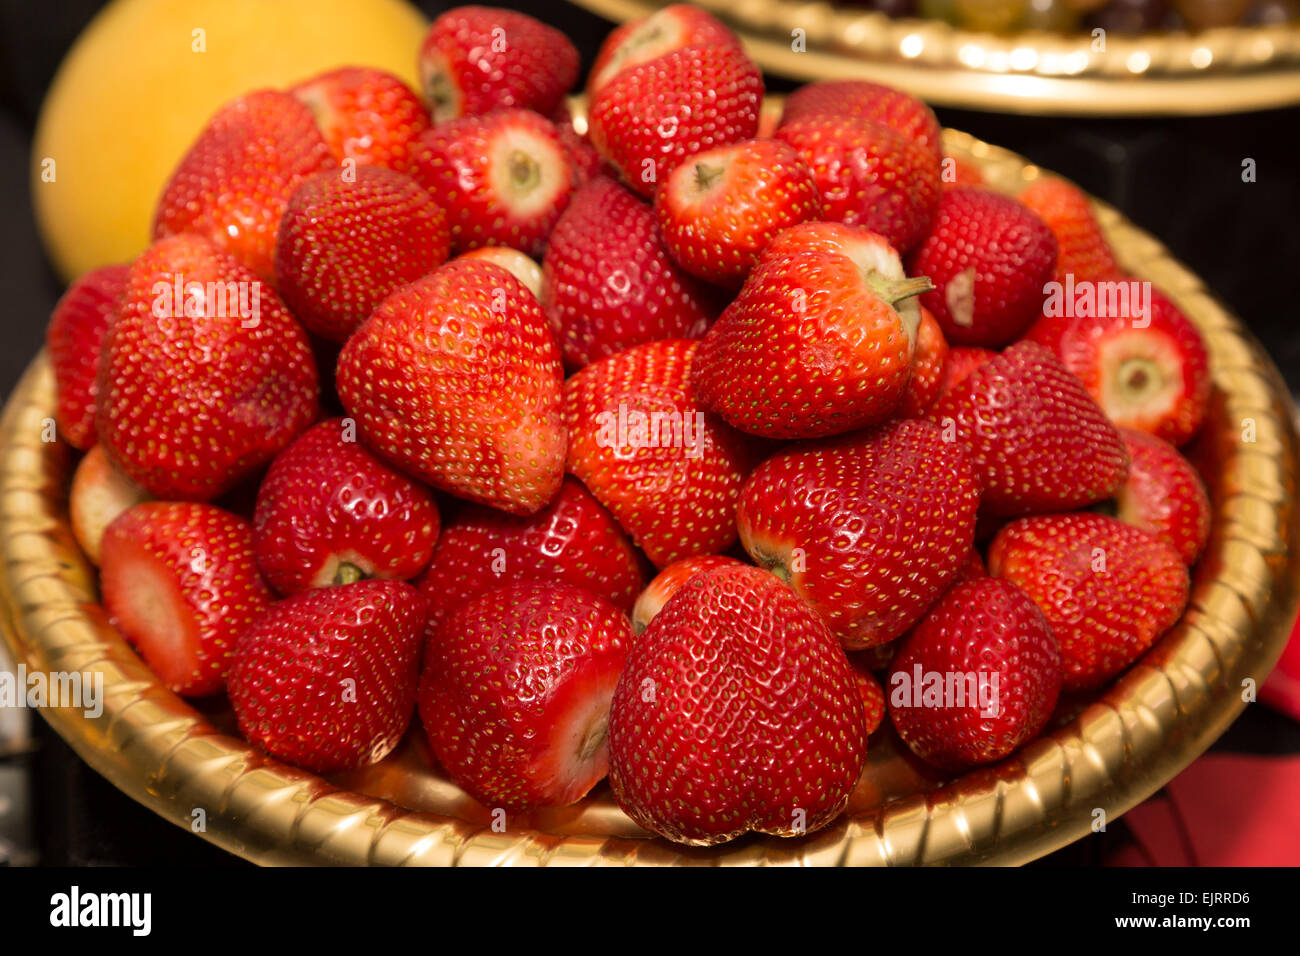 High view of lots of fresh juicy strawberries in a tub Stock Photo